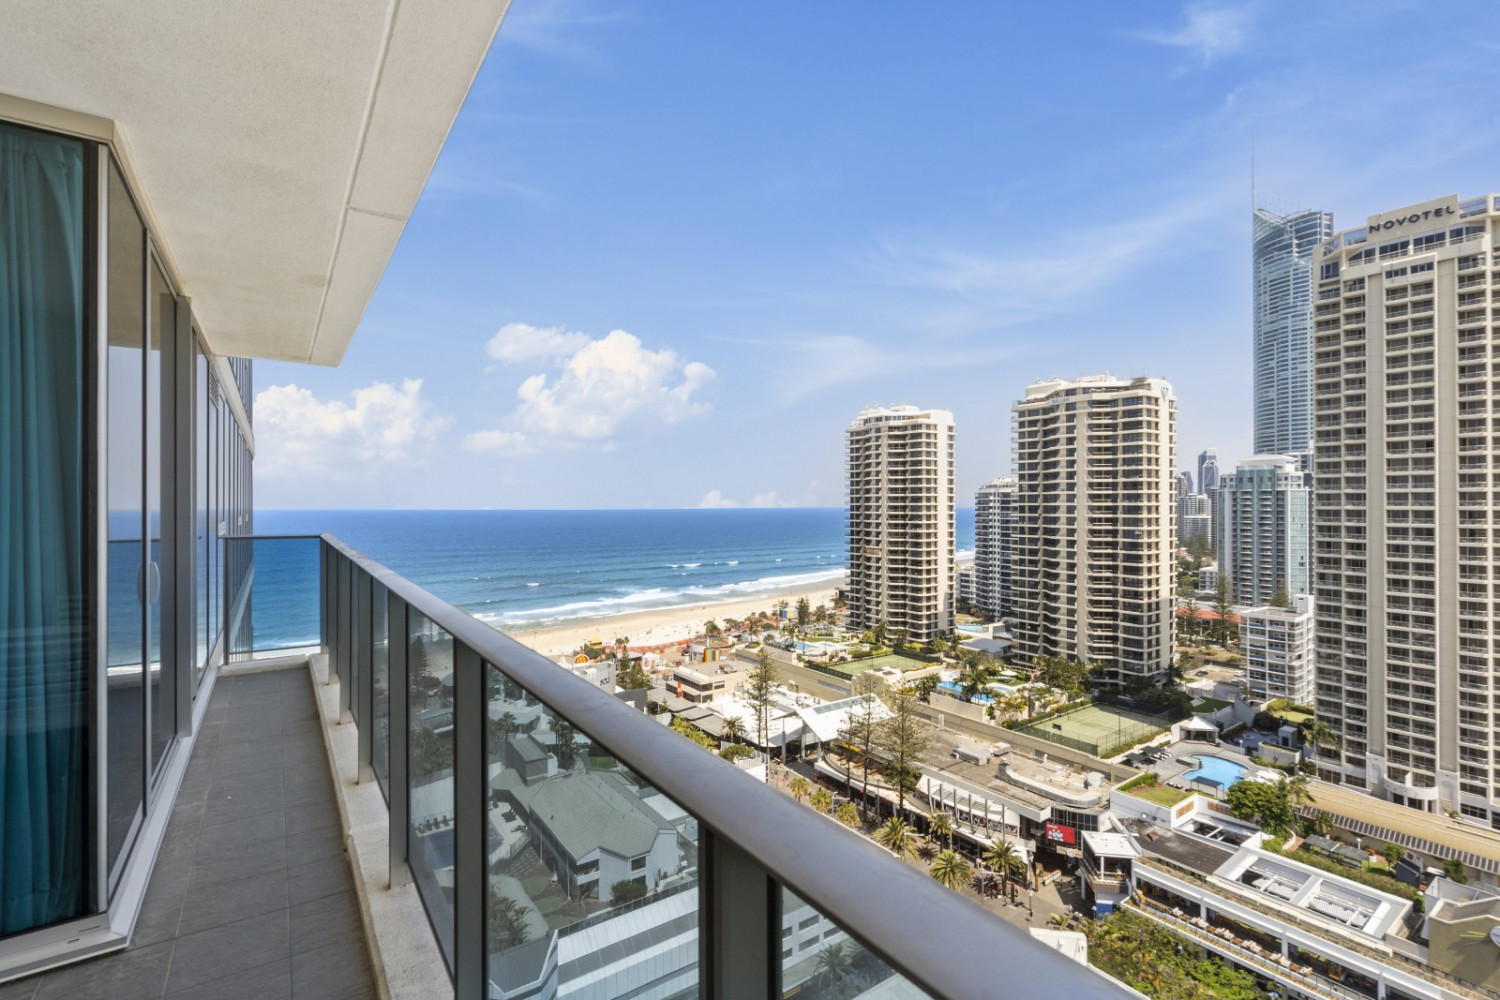 Balcony views overlooking Surfers Paradise